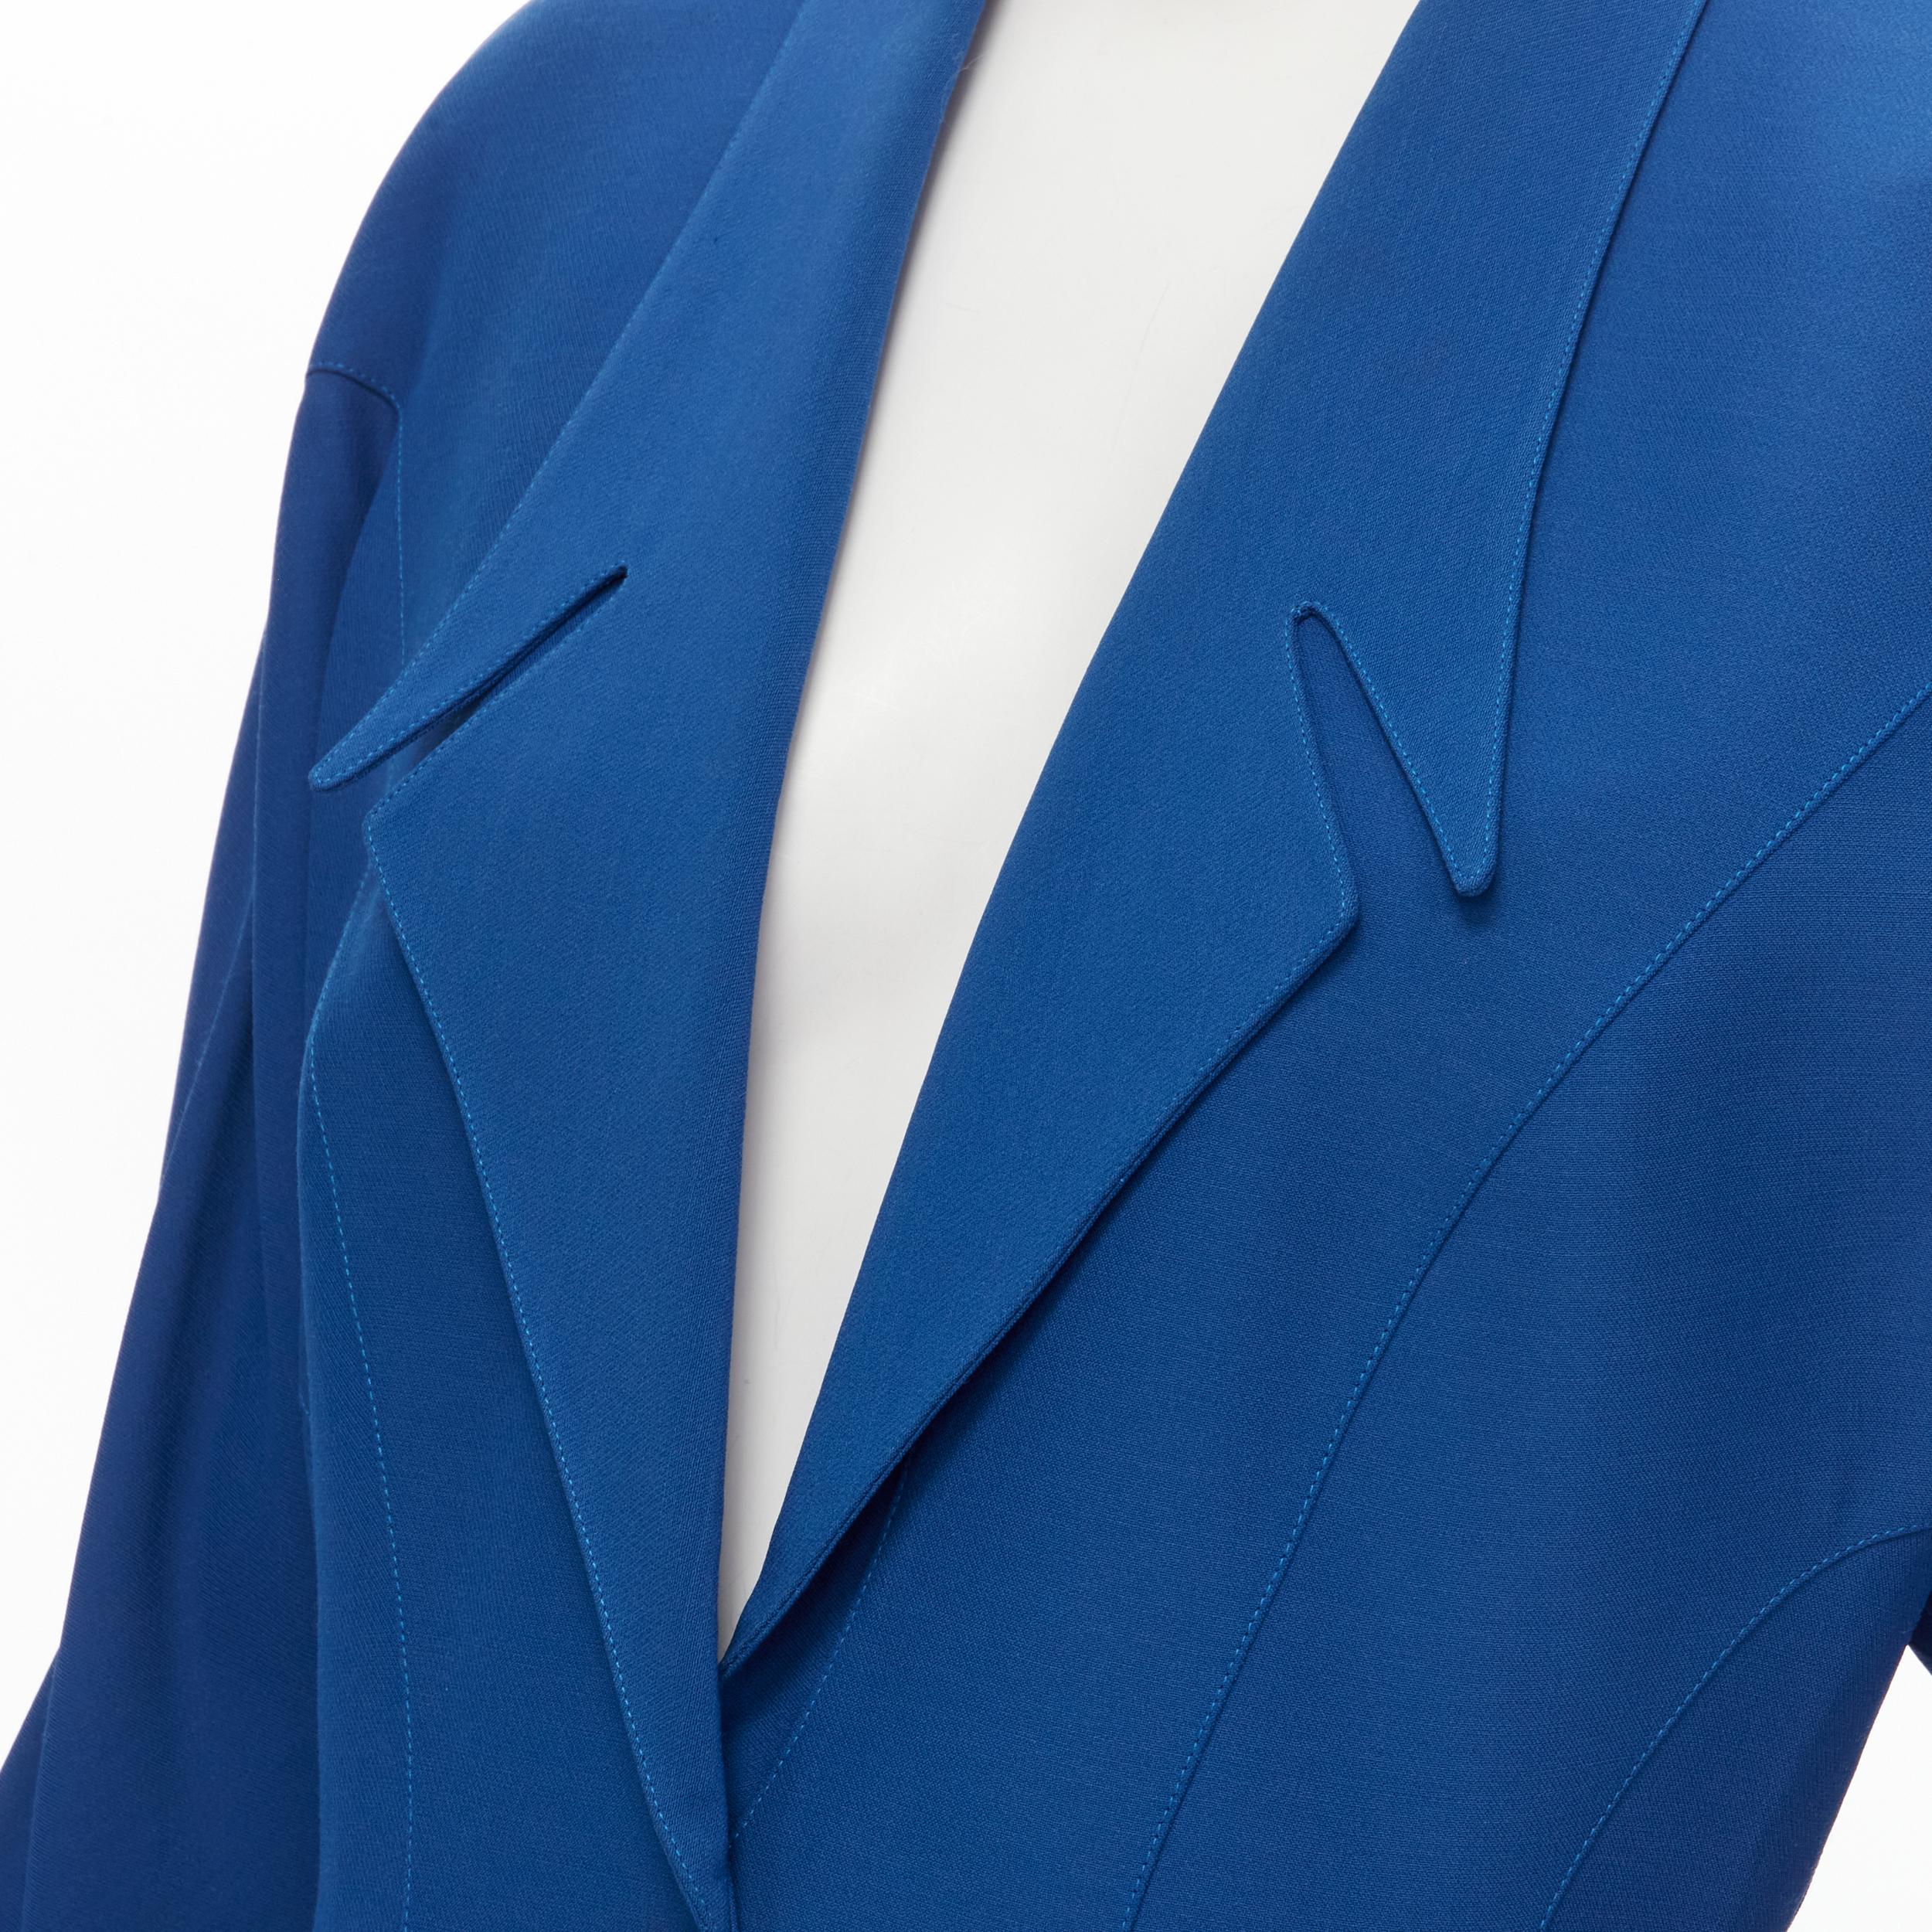 THIERRY MUGLER Vintage cobalt blue futuristic collar peplum jacket FR42 L 
Reference: GIYG/A00163 
Brand: Thierry Mugler 
Designer: Thierry Mugler 
Material: Viscose 
Color: Blue 
Pattern: Solid 
Closure: Snap 
Extra Detail: Futuristic notched